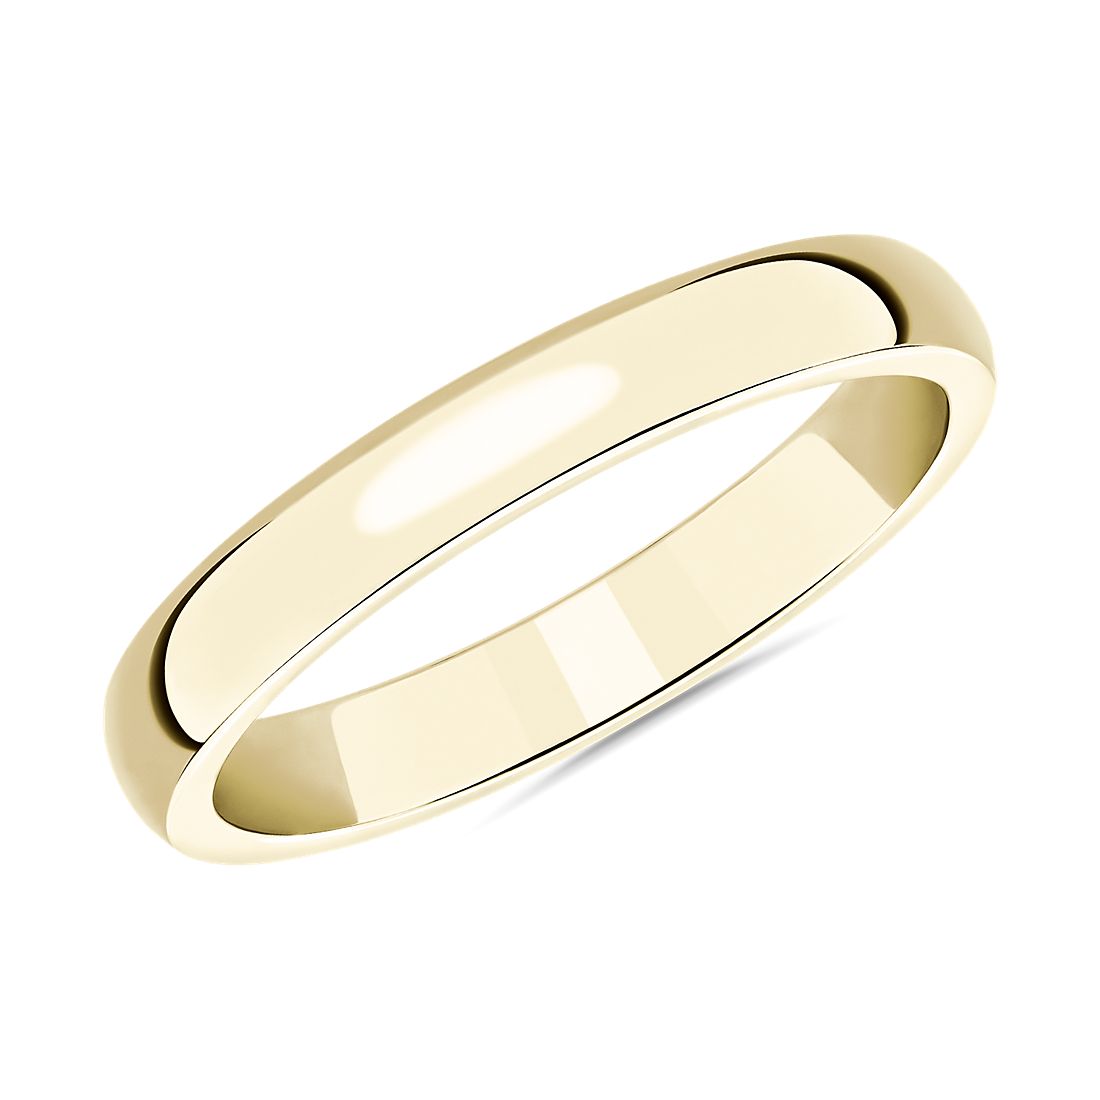 Mid-weight Comfort Fit Wedding Ring in 14k Yellow Gold (3 mm)